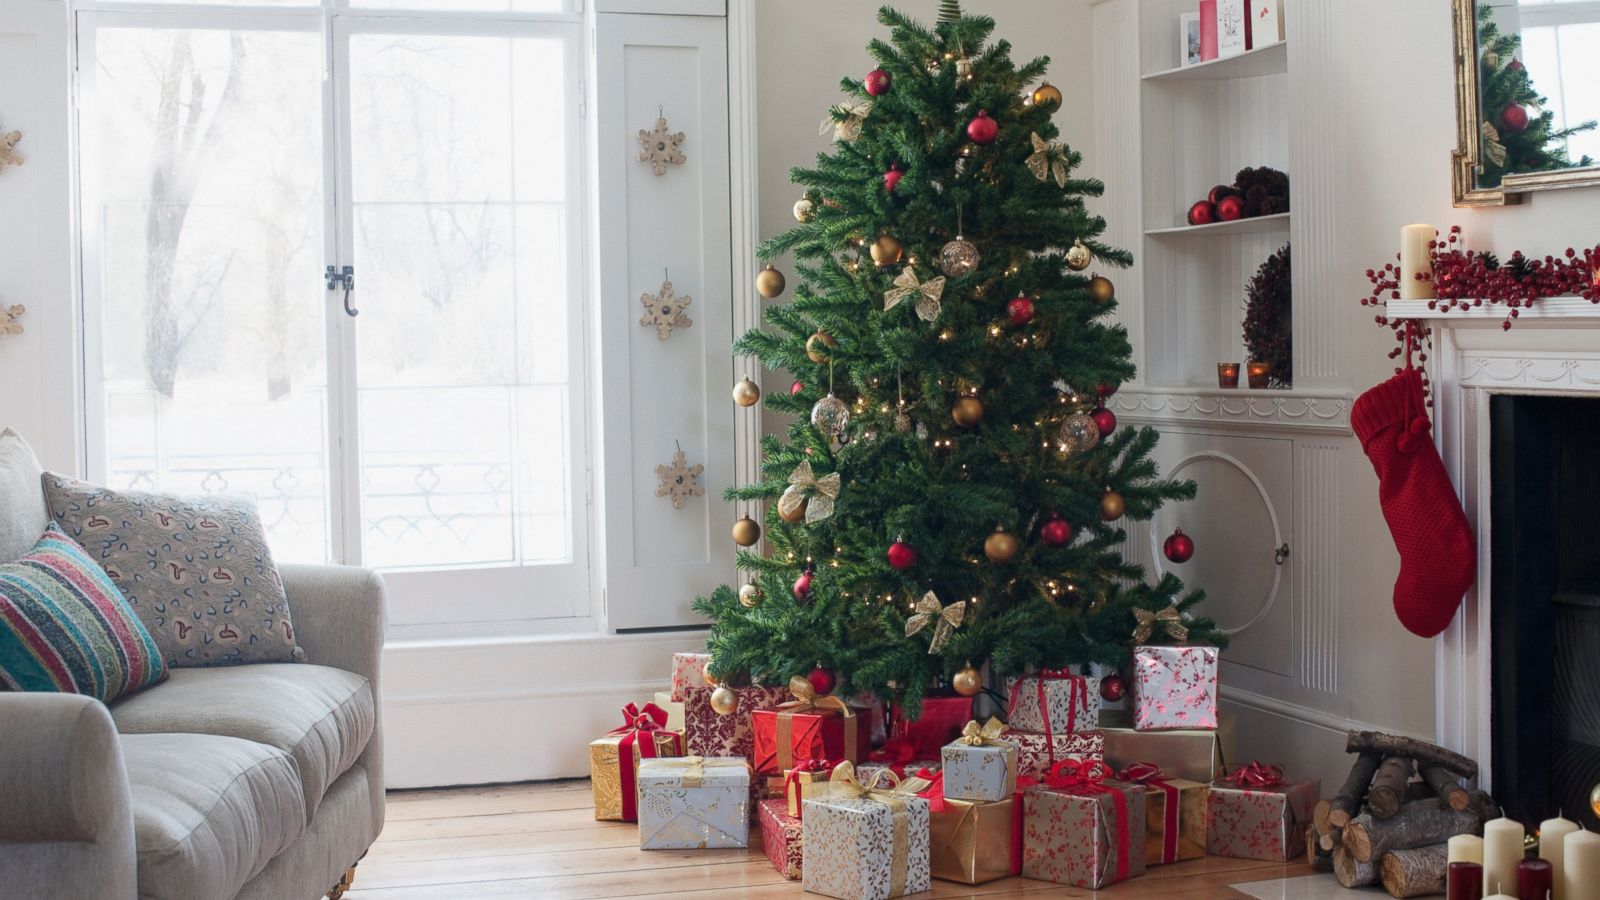 How to Decorate a Luxe-Looking Christmas Tree on a Budget - ABC News